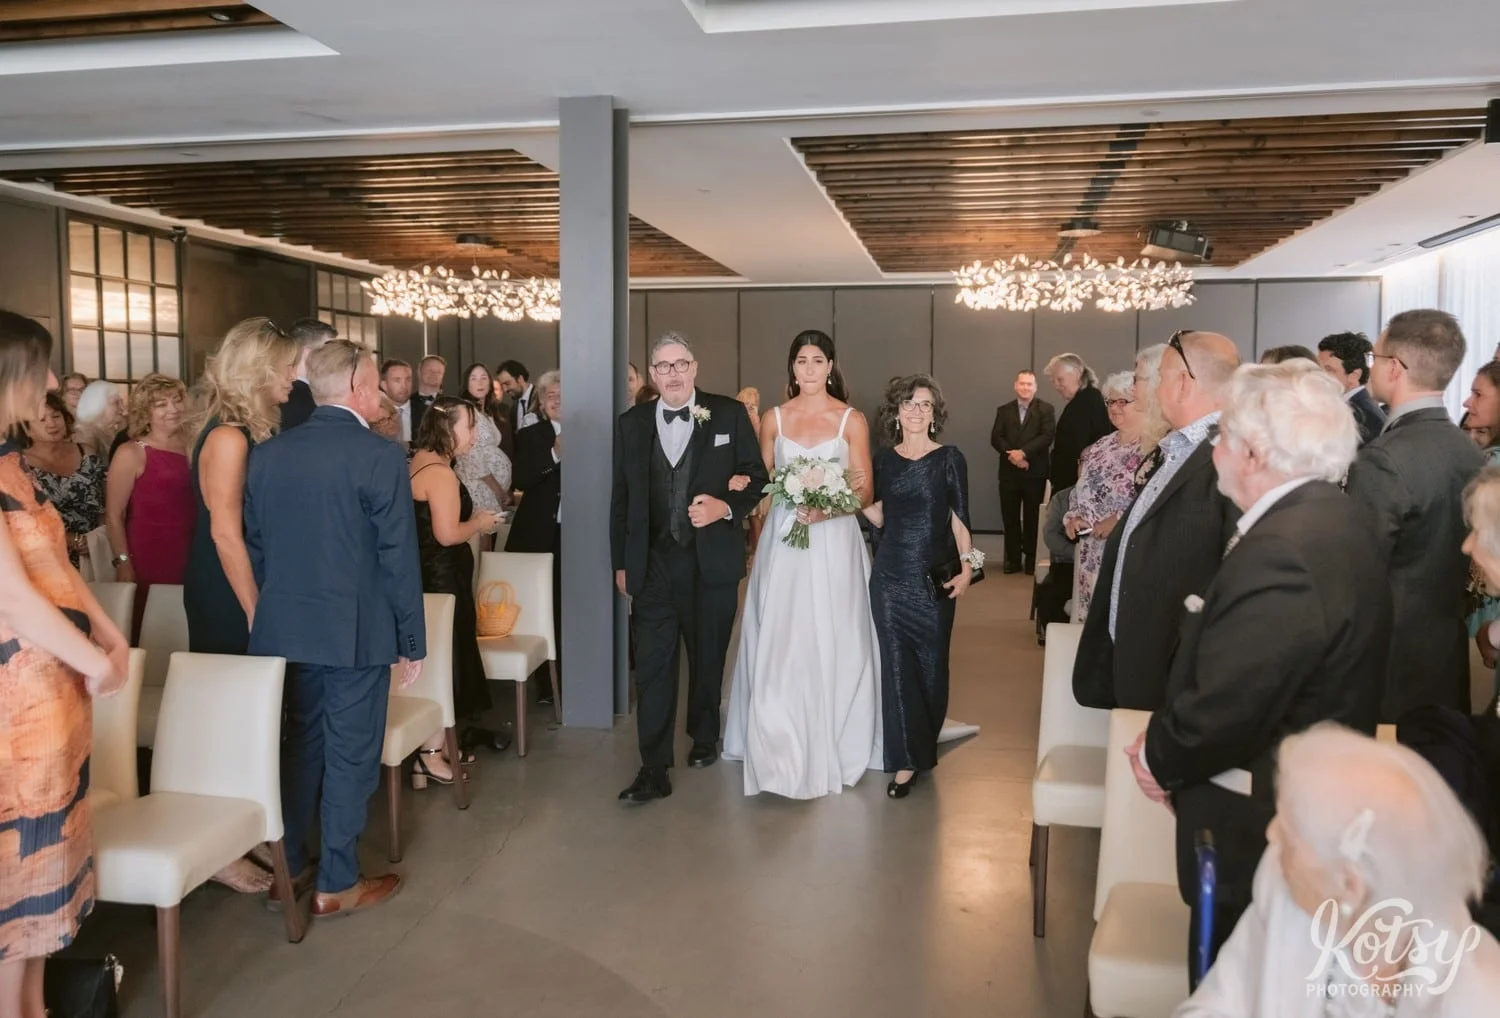 A bride in a white wedding gown walks down an aisle with her parents during a packed house at a Village Loft wedding ceremony in Toronto, Canada